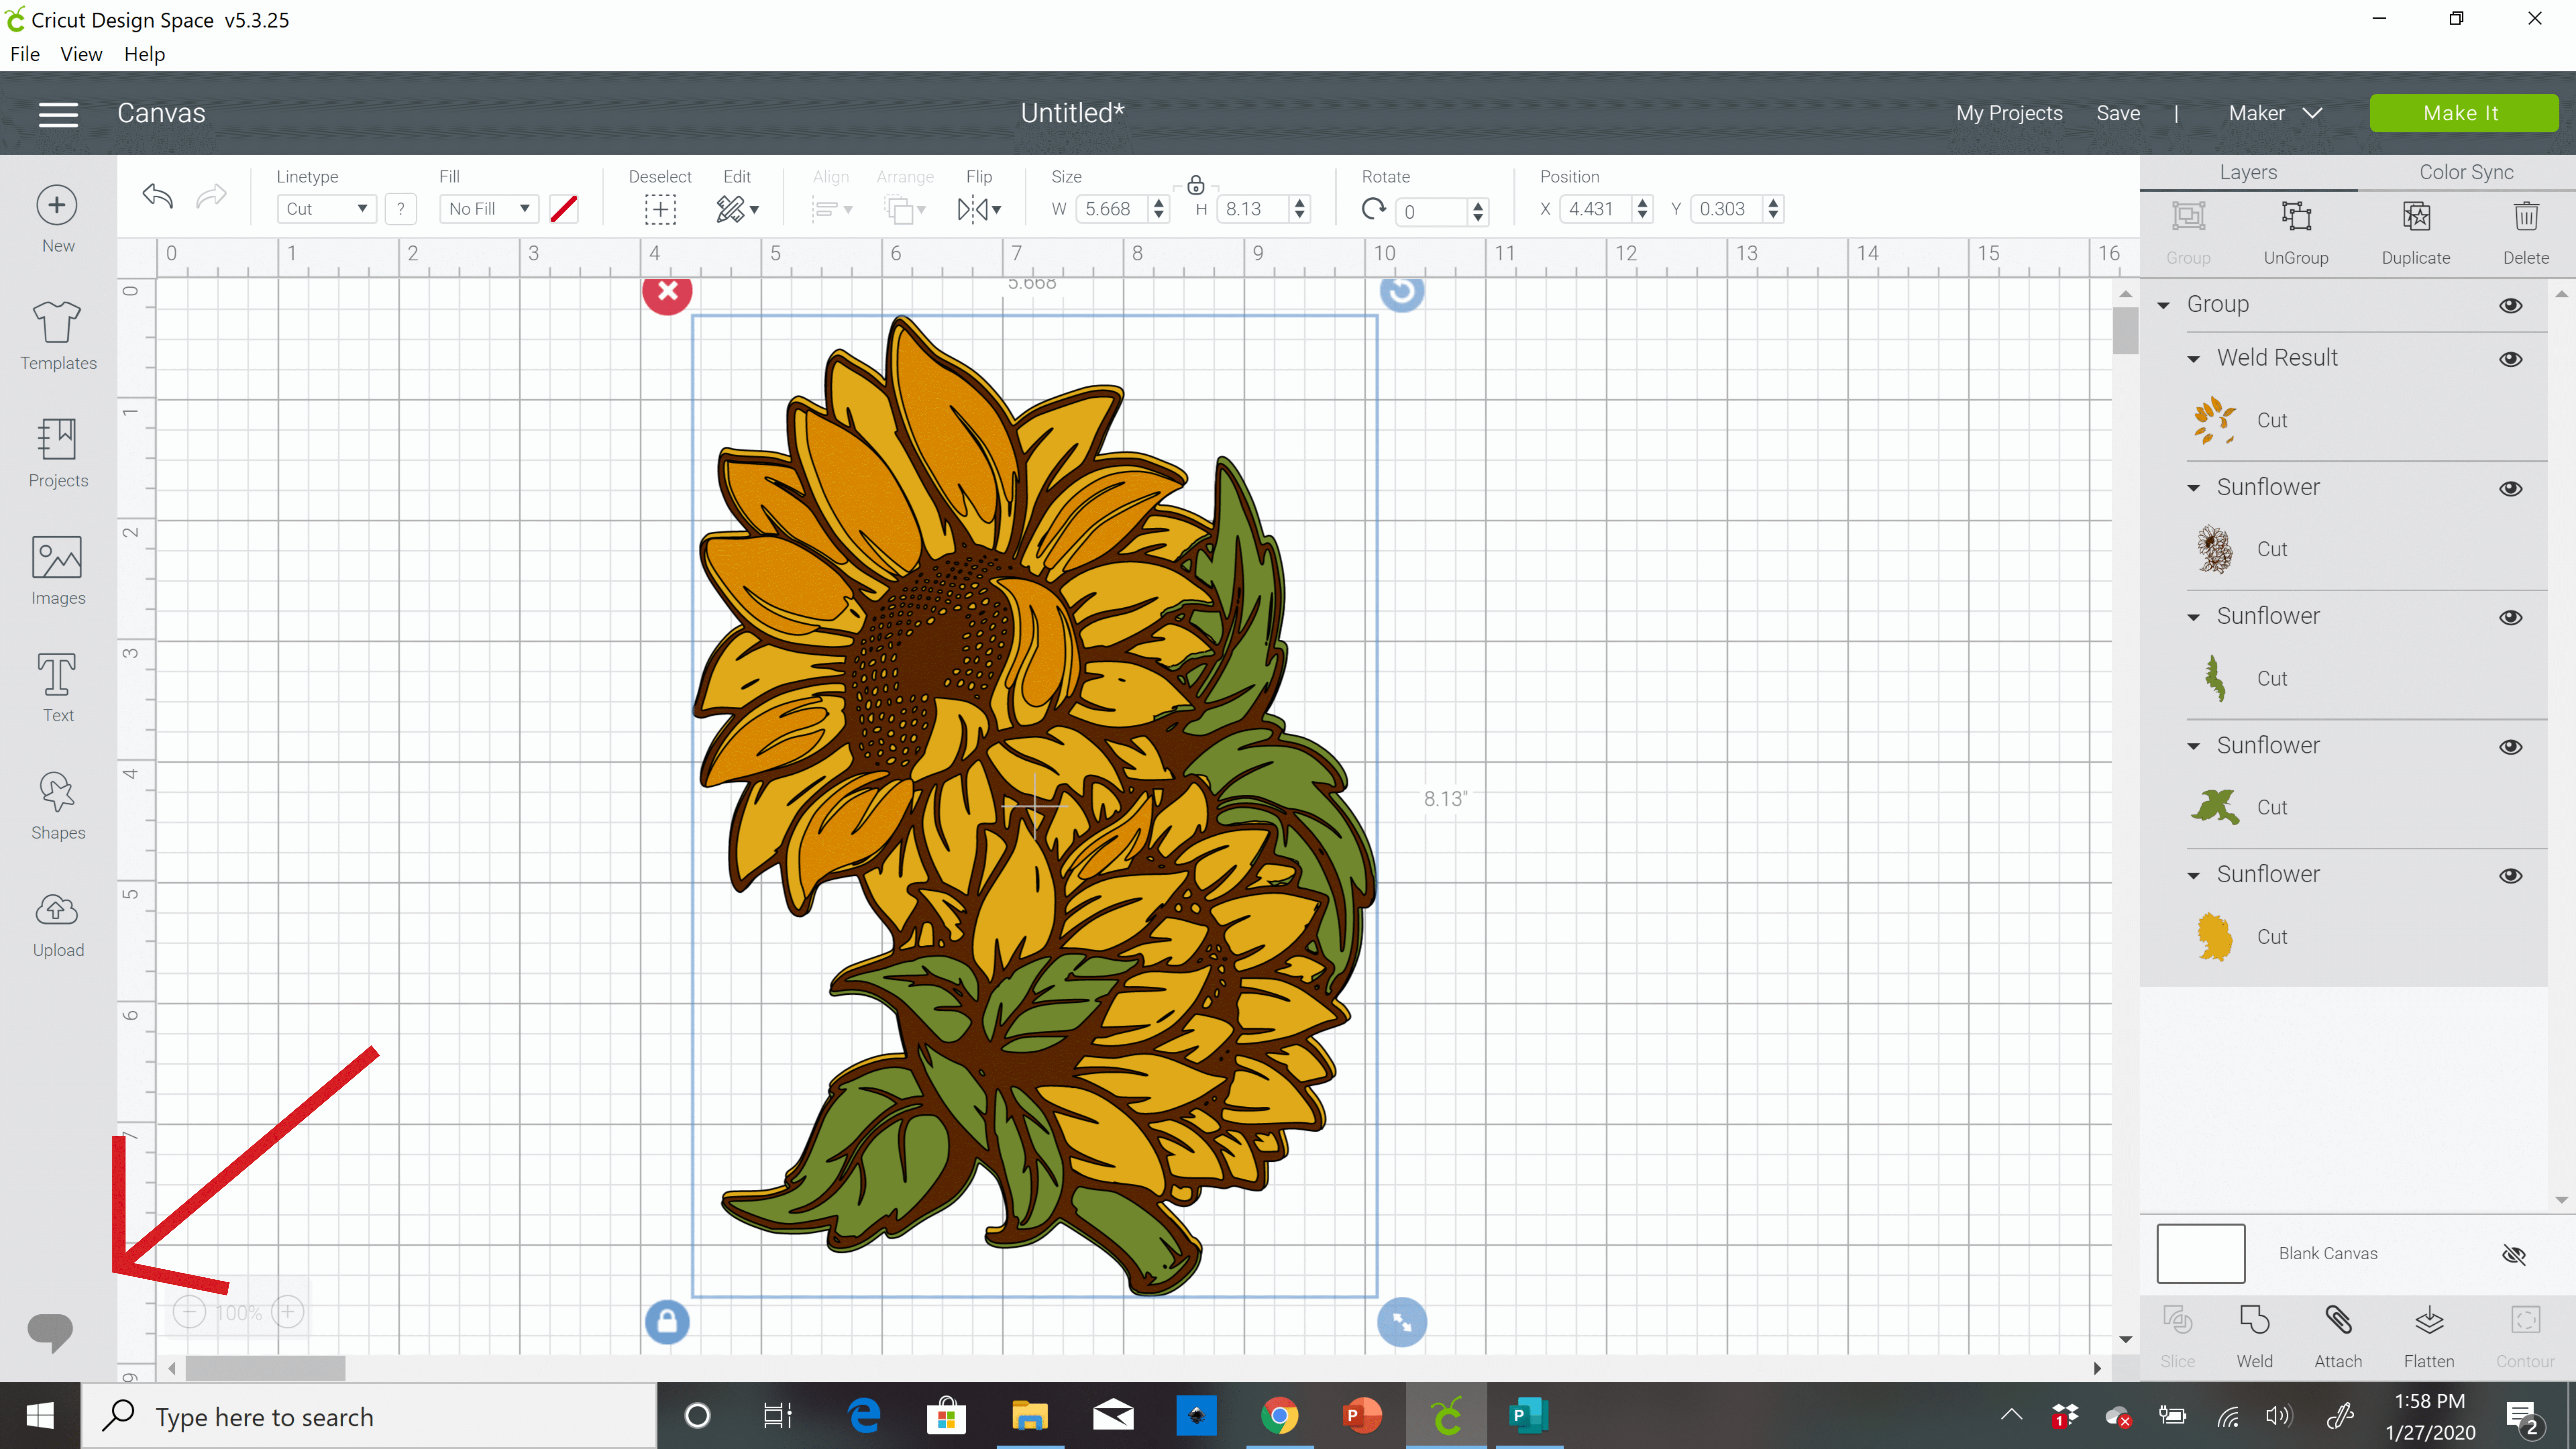 A screenshot of the Cricut Design Space canvas with a sunflower graphic on the grid. A red arrow is pointing to a speech bubble icon in the bottom left-hand corner of the screen.